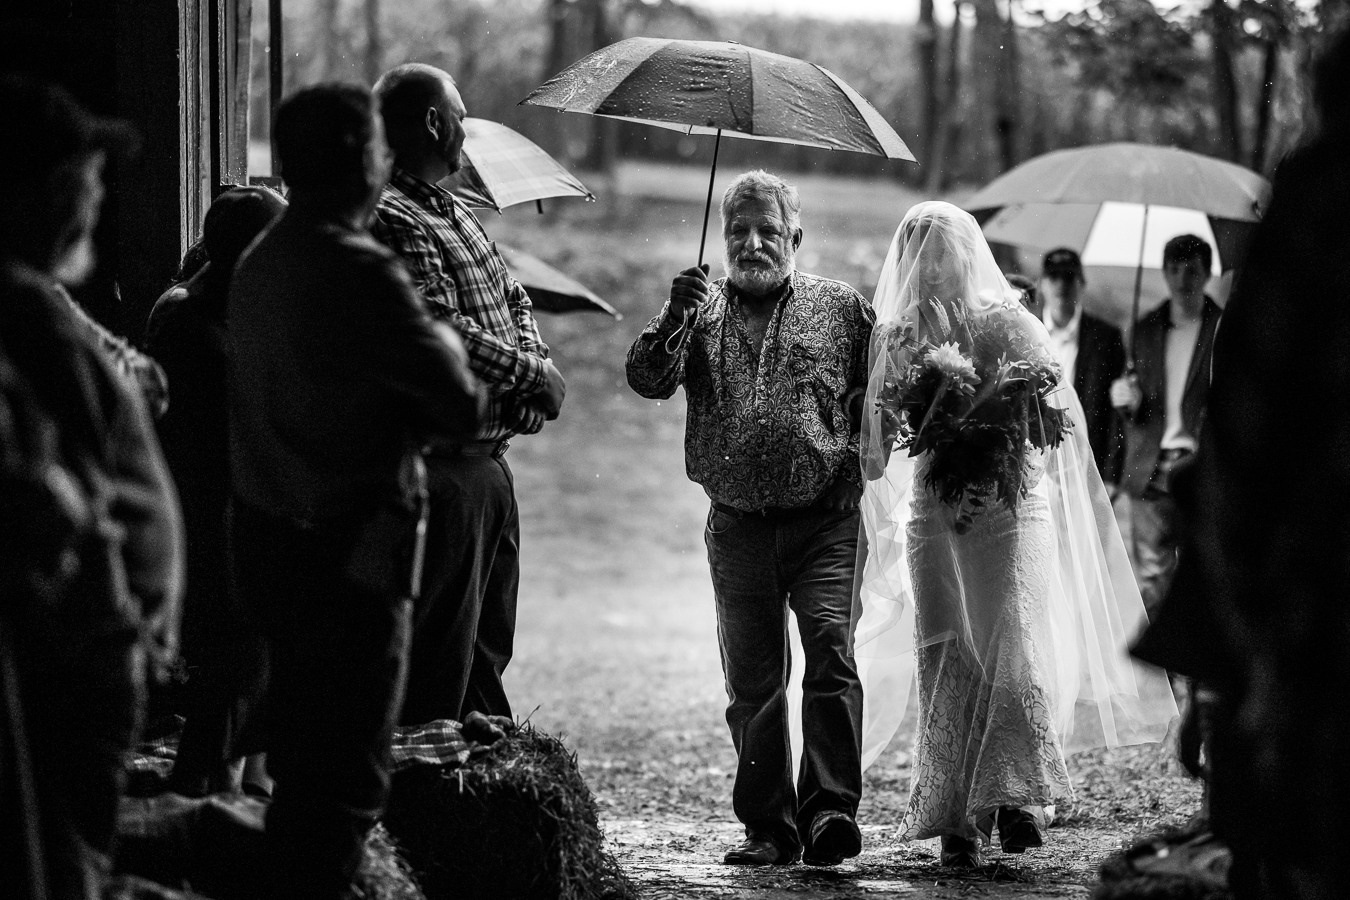 candid black and white image of the bride as she walks out of the rainy weather into the barn with her dad, who is holding an umbrella, as the guests stand and watch around her during this wild country wedding ceremony 